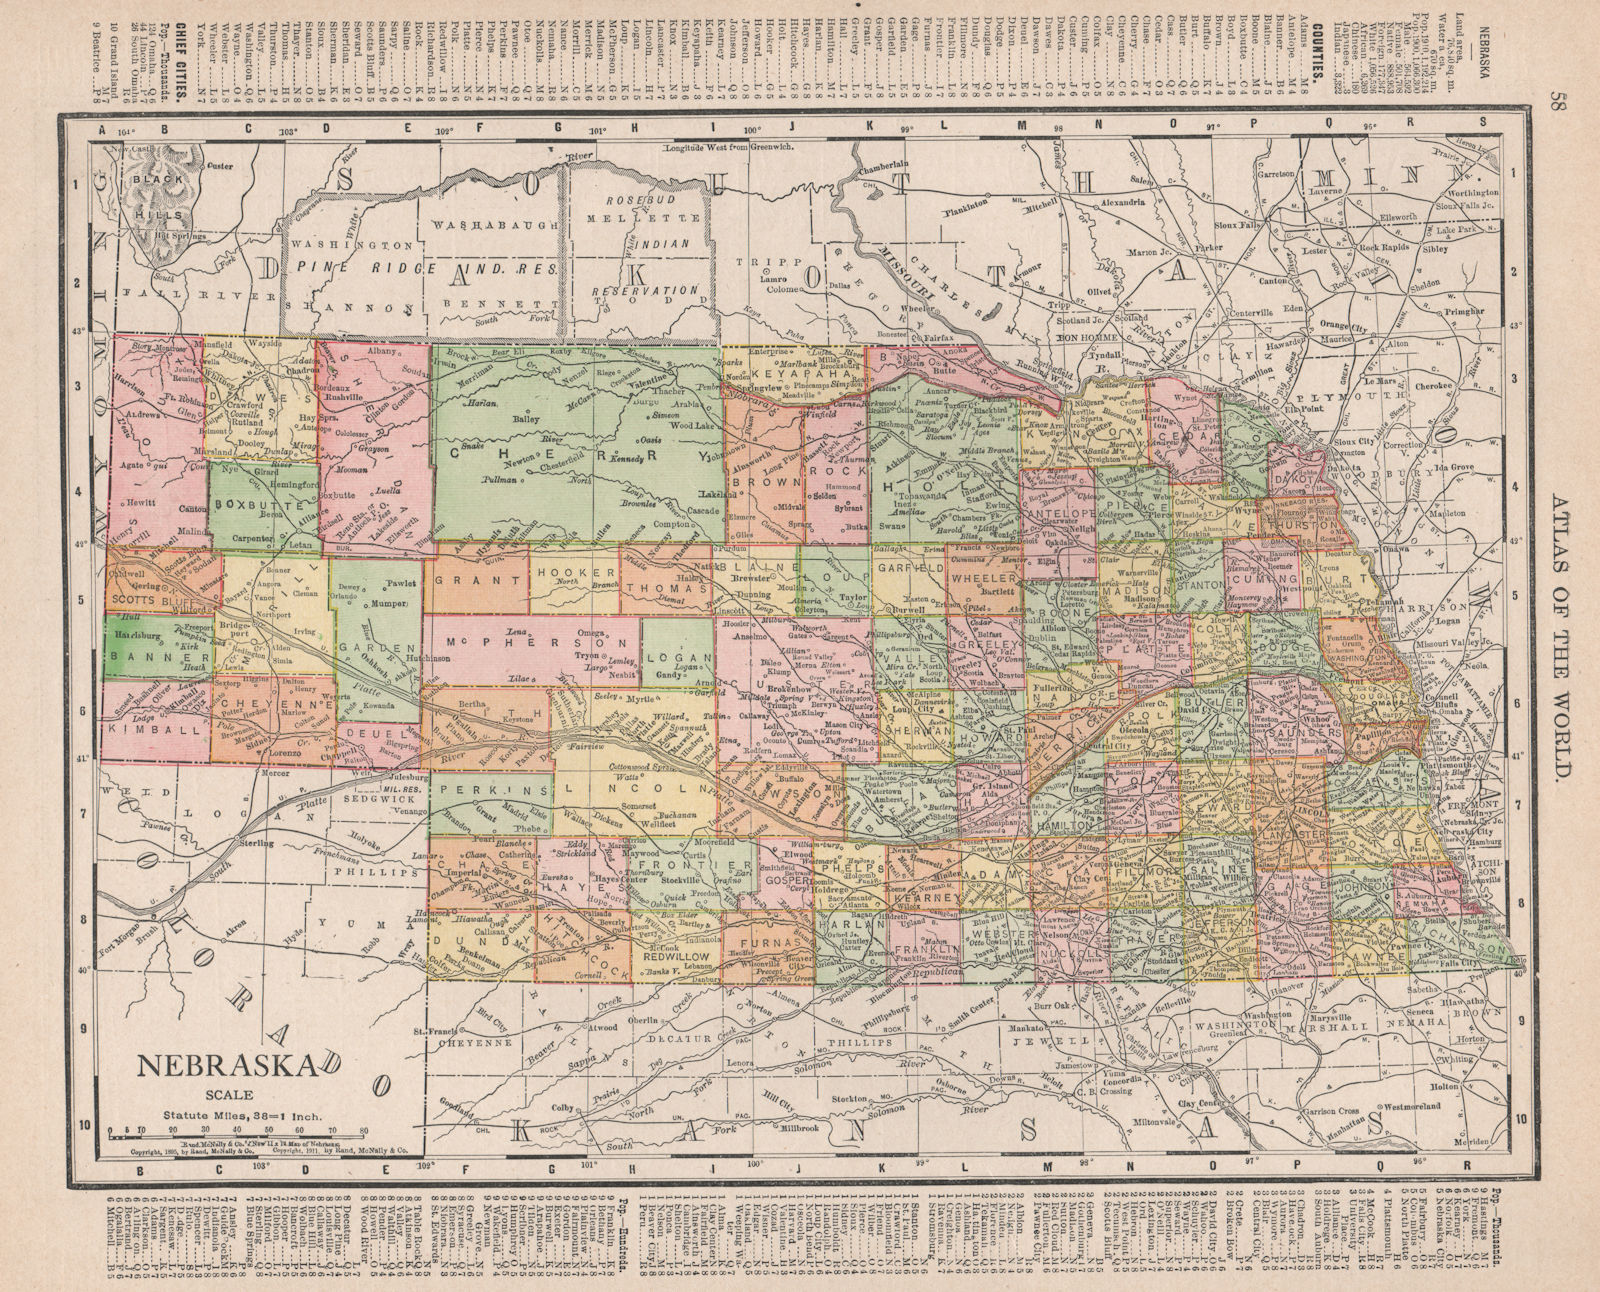 Nebraska state map showing counties. RAND MCNALLY 1912 old antique chart